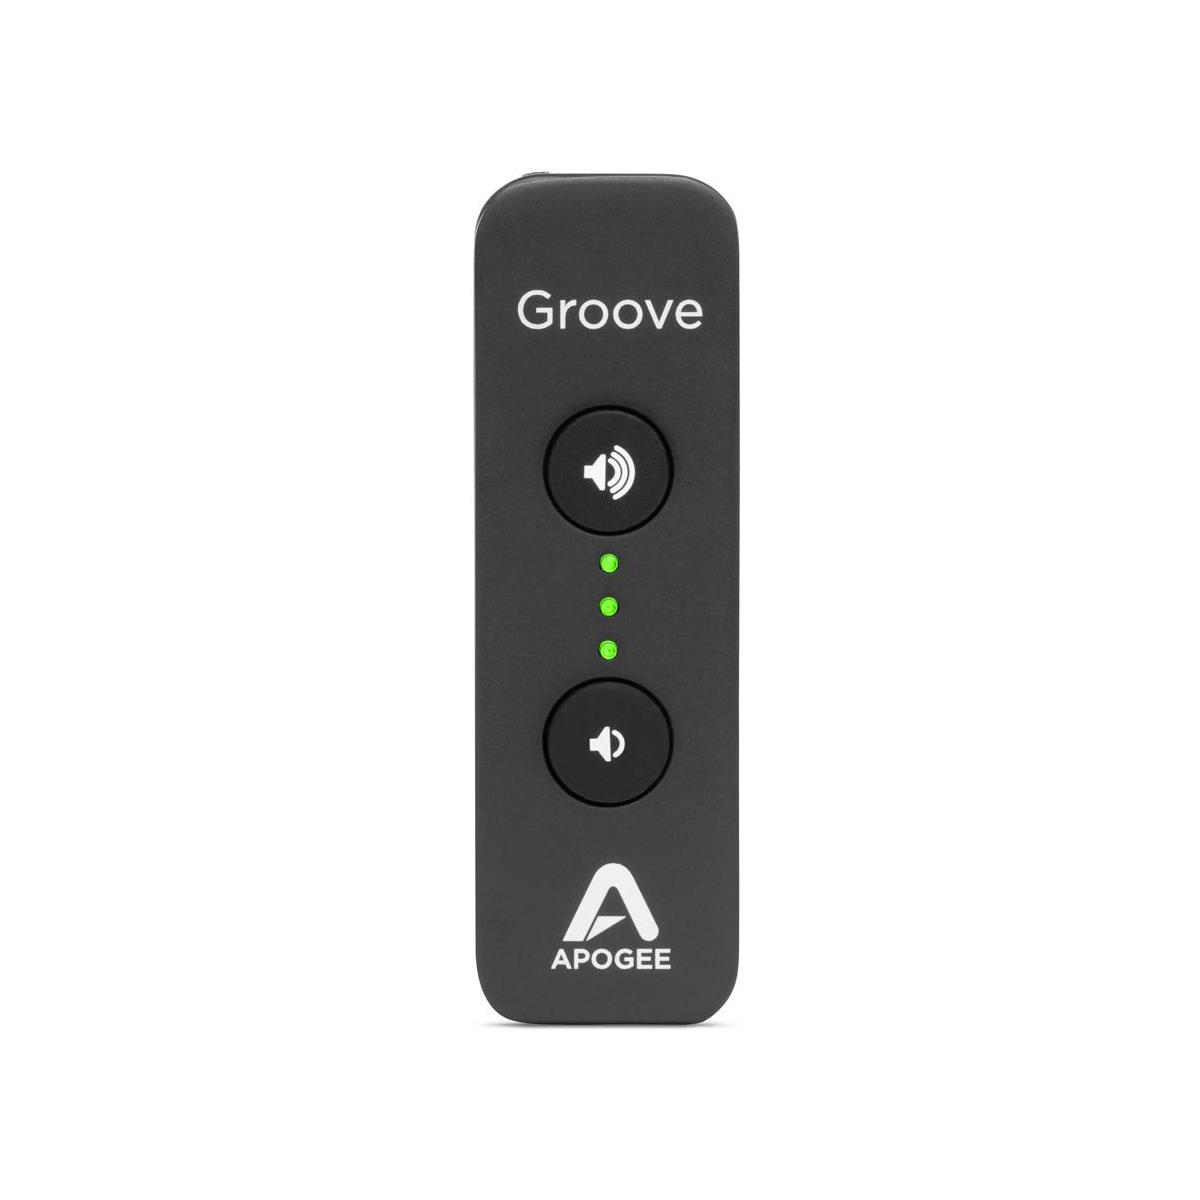 Image of Apogee Electronics Groove Portable USB DAC and Headphone Amp for Mac or PC